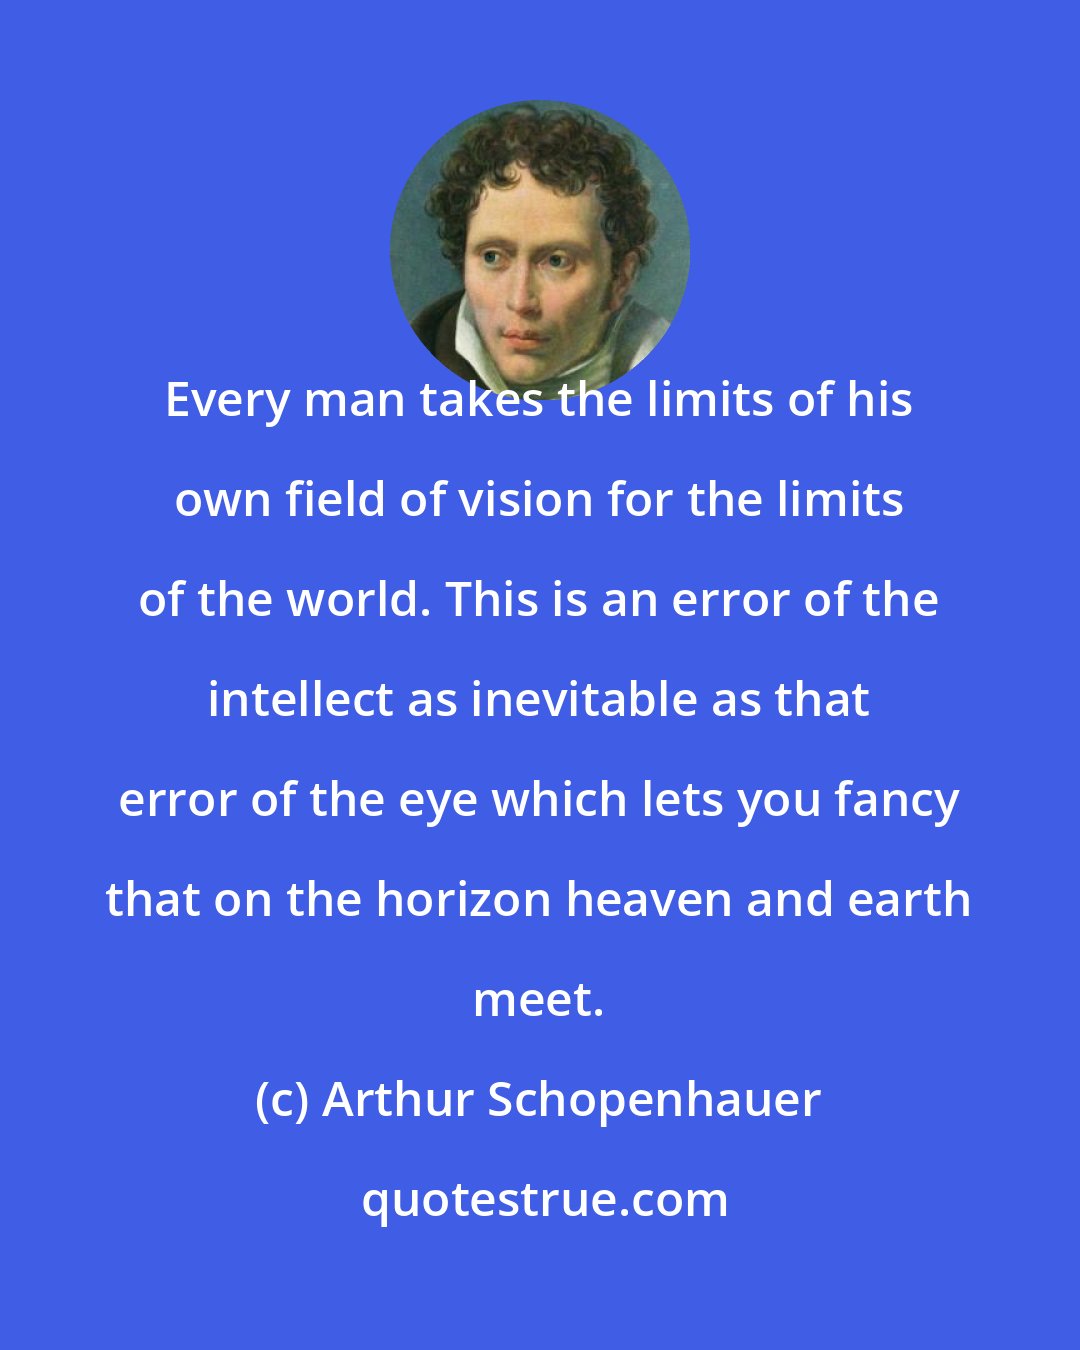 Arthur Schopenhauer: Every man takes the limits of his own field of vision for the limits of the world. This is an error of the intellect as inevitable as that error of the eye which lets you fancy that on the horizon heaven and earth meet.